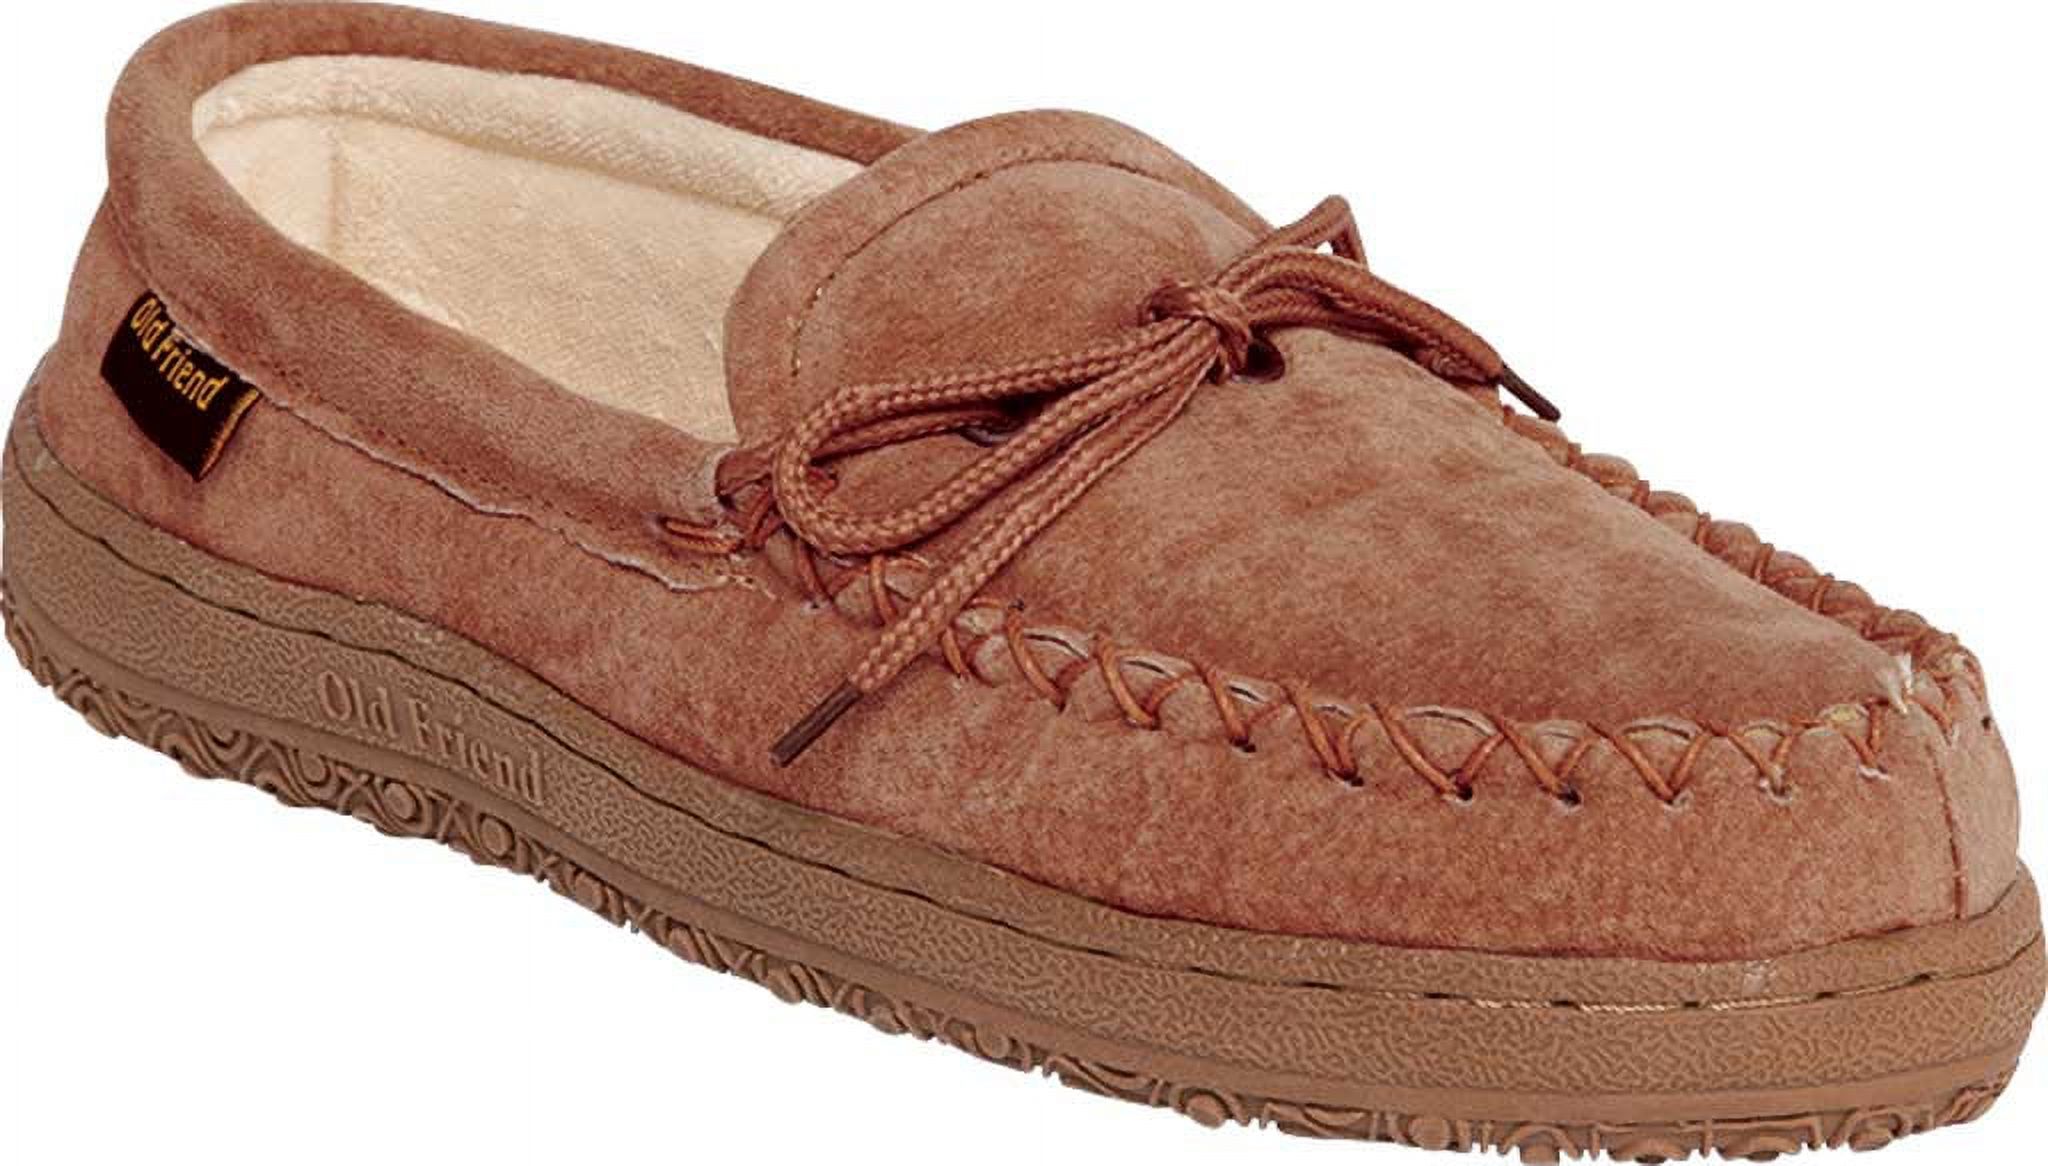 Men's Old Friend Terry Cloth Moccasin Slipper Chestnut II Suede 9 M - image 1 of 2